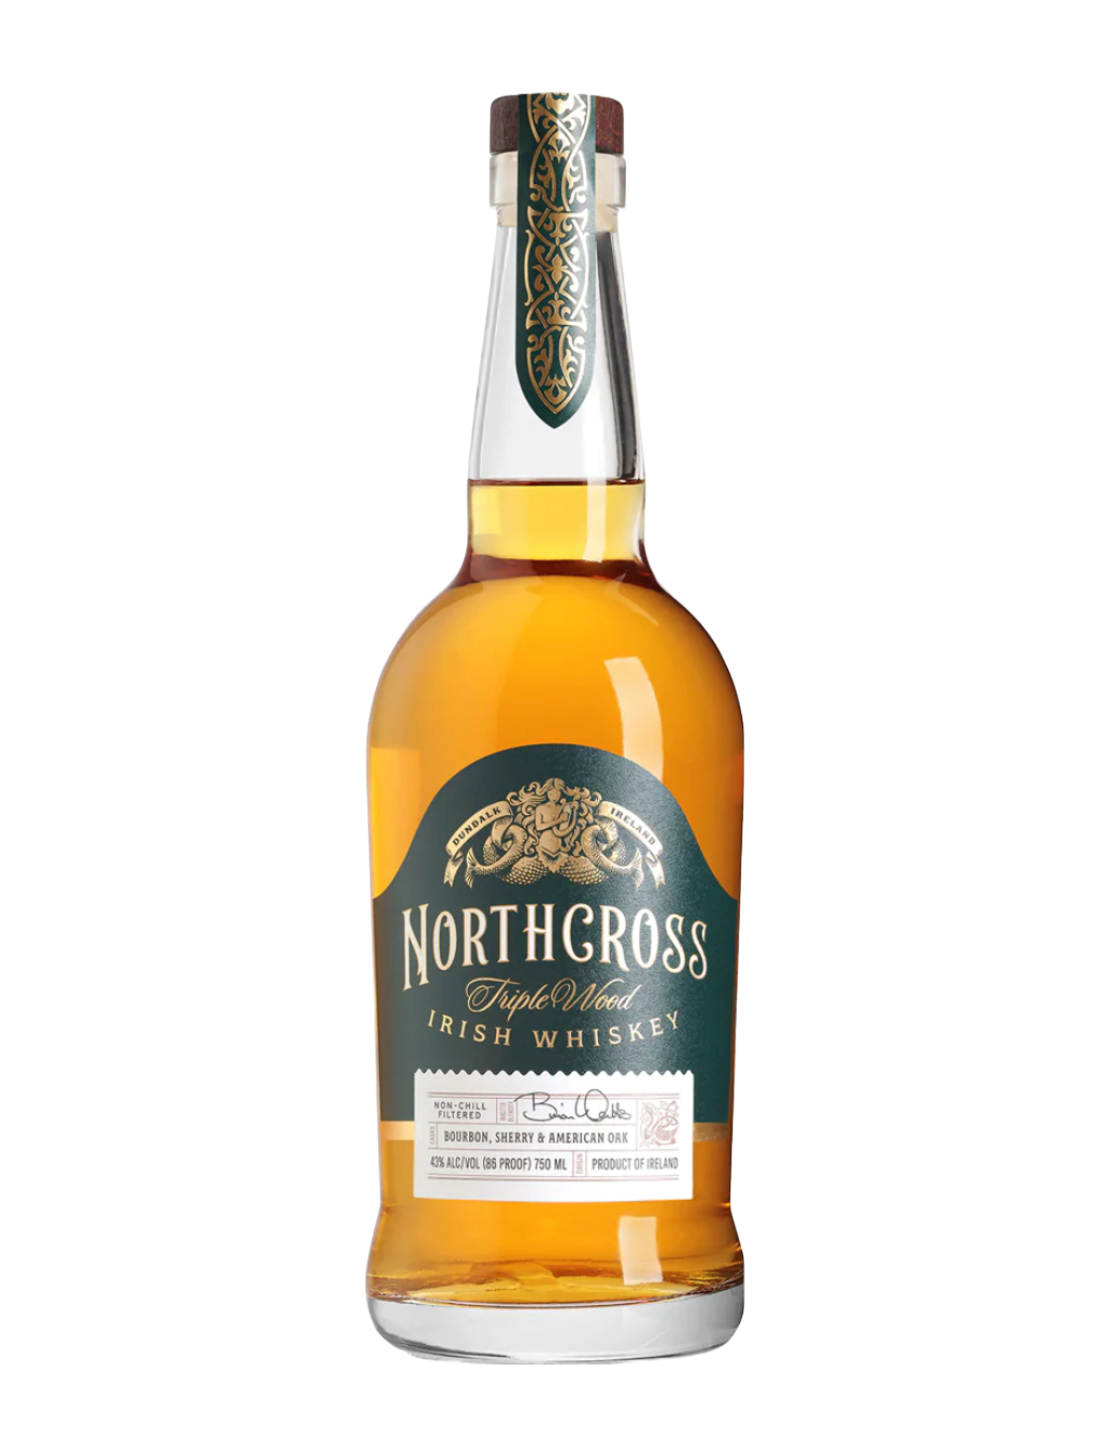 An elegant bottle of Northcross Irish Whiskey - Triple Wood in front of a plain white background